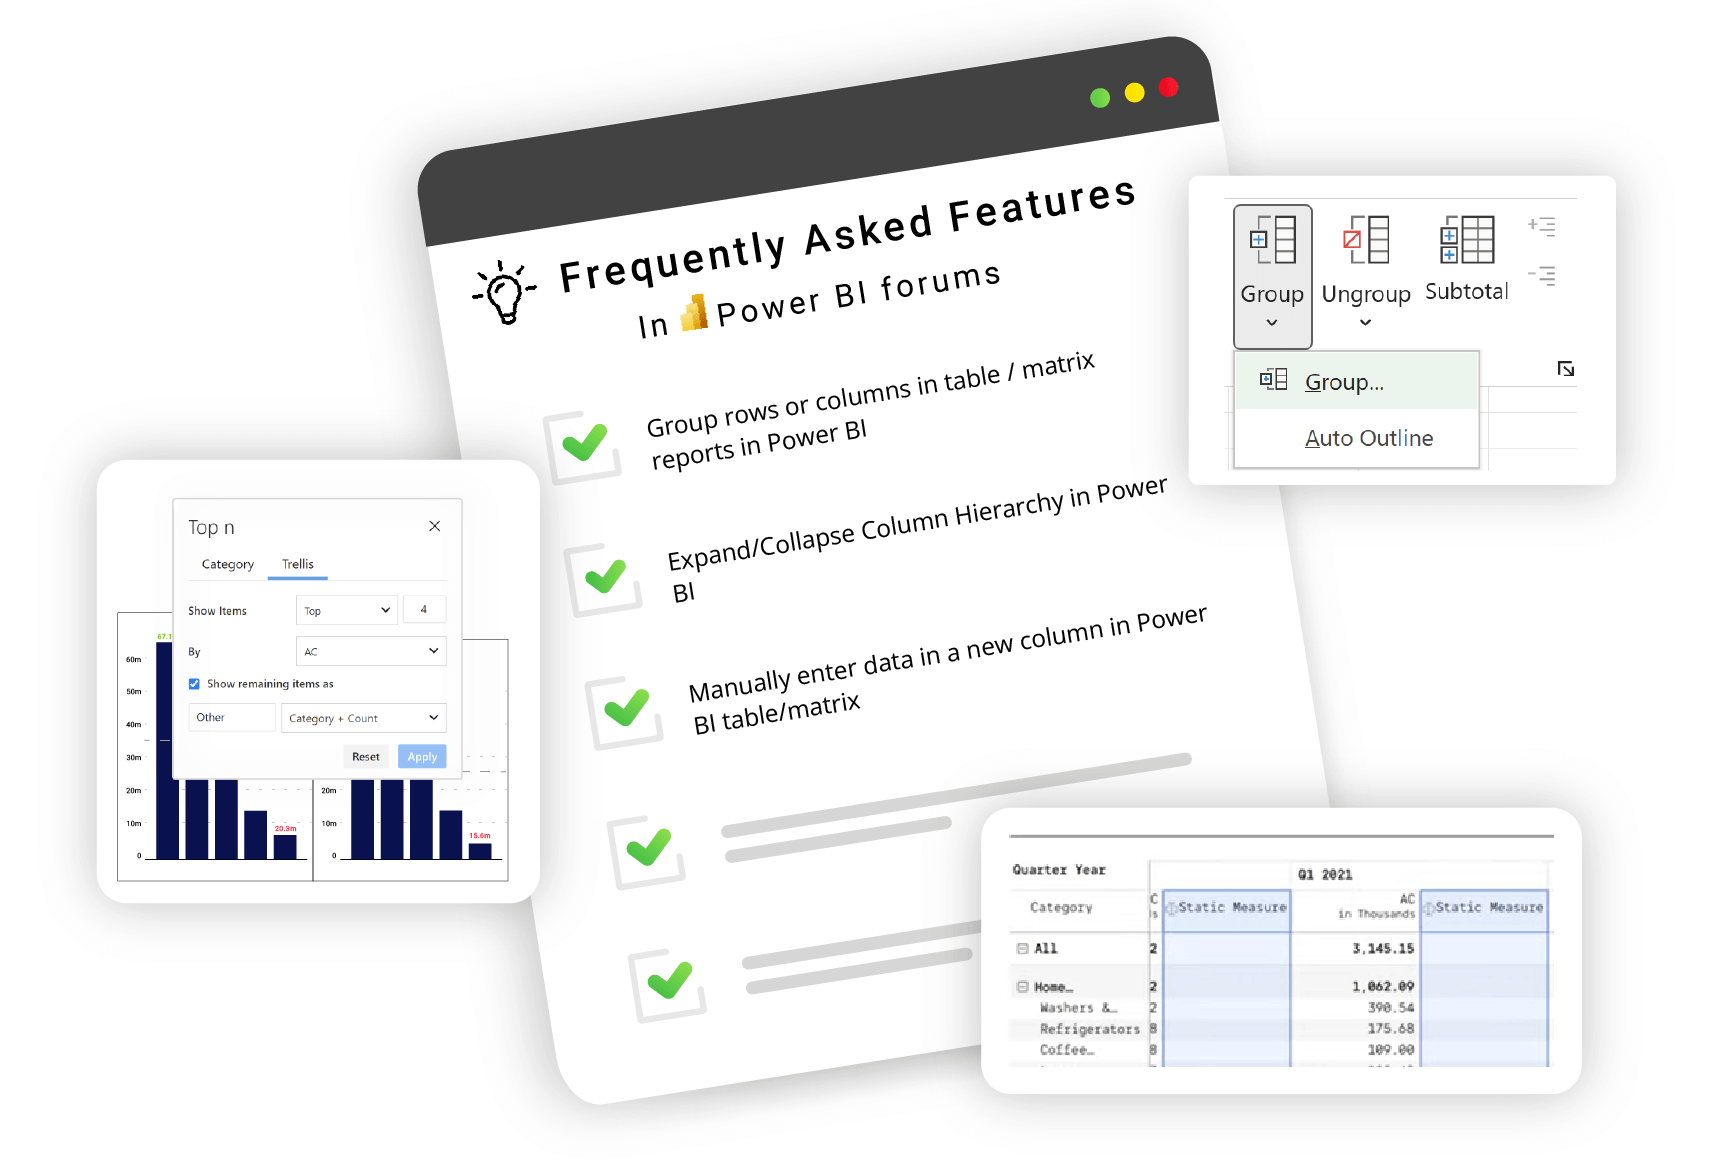 Frequently Asked Features